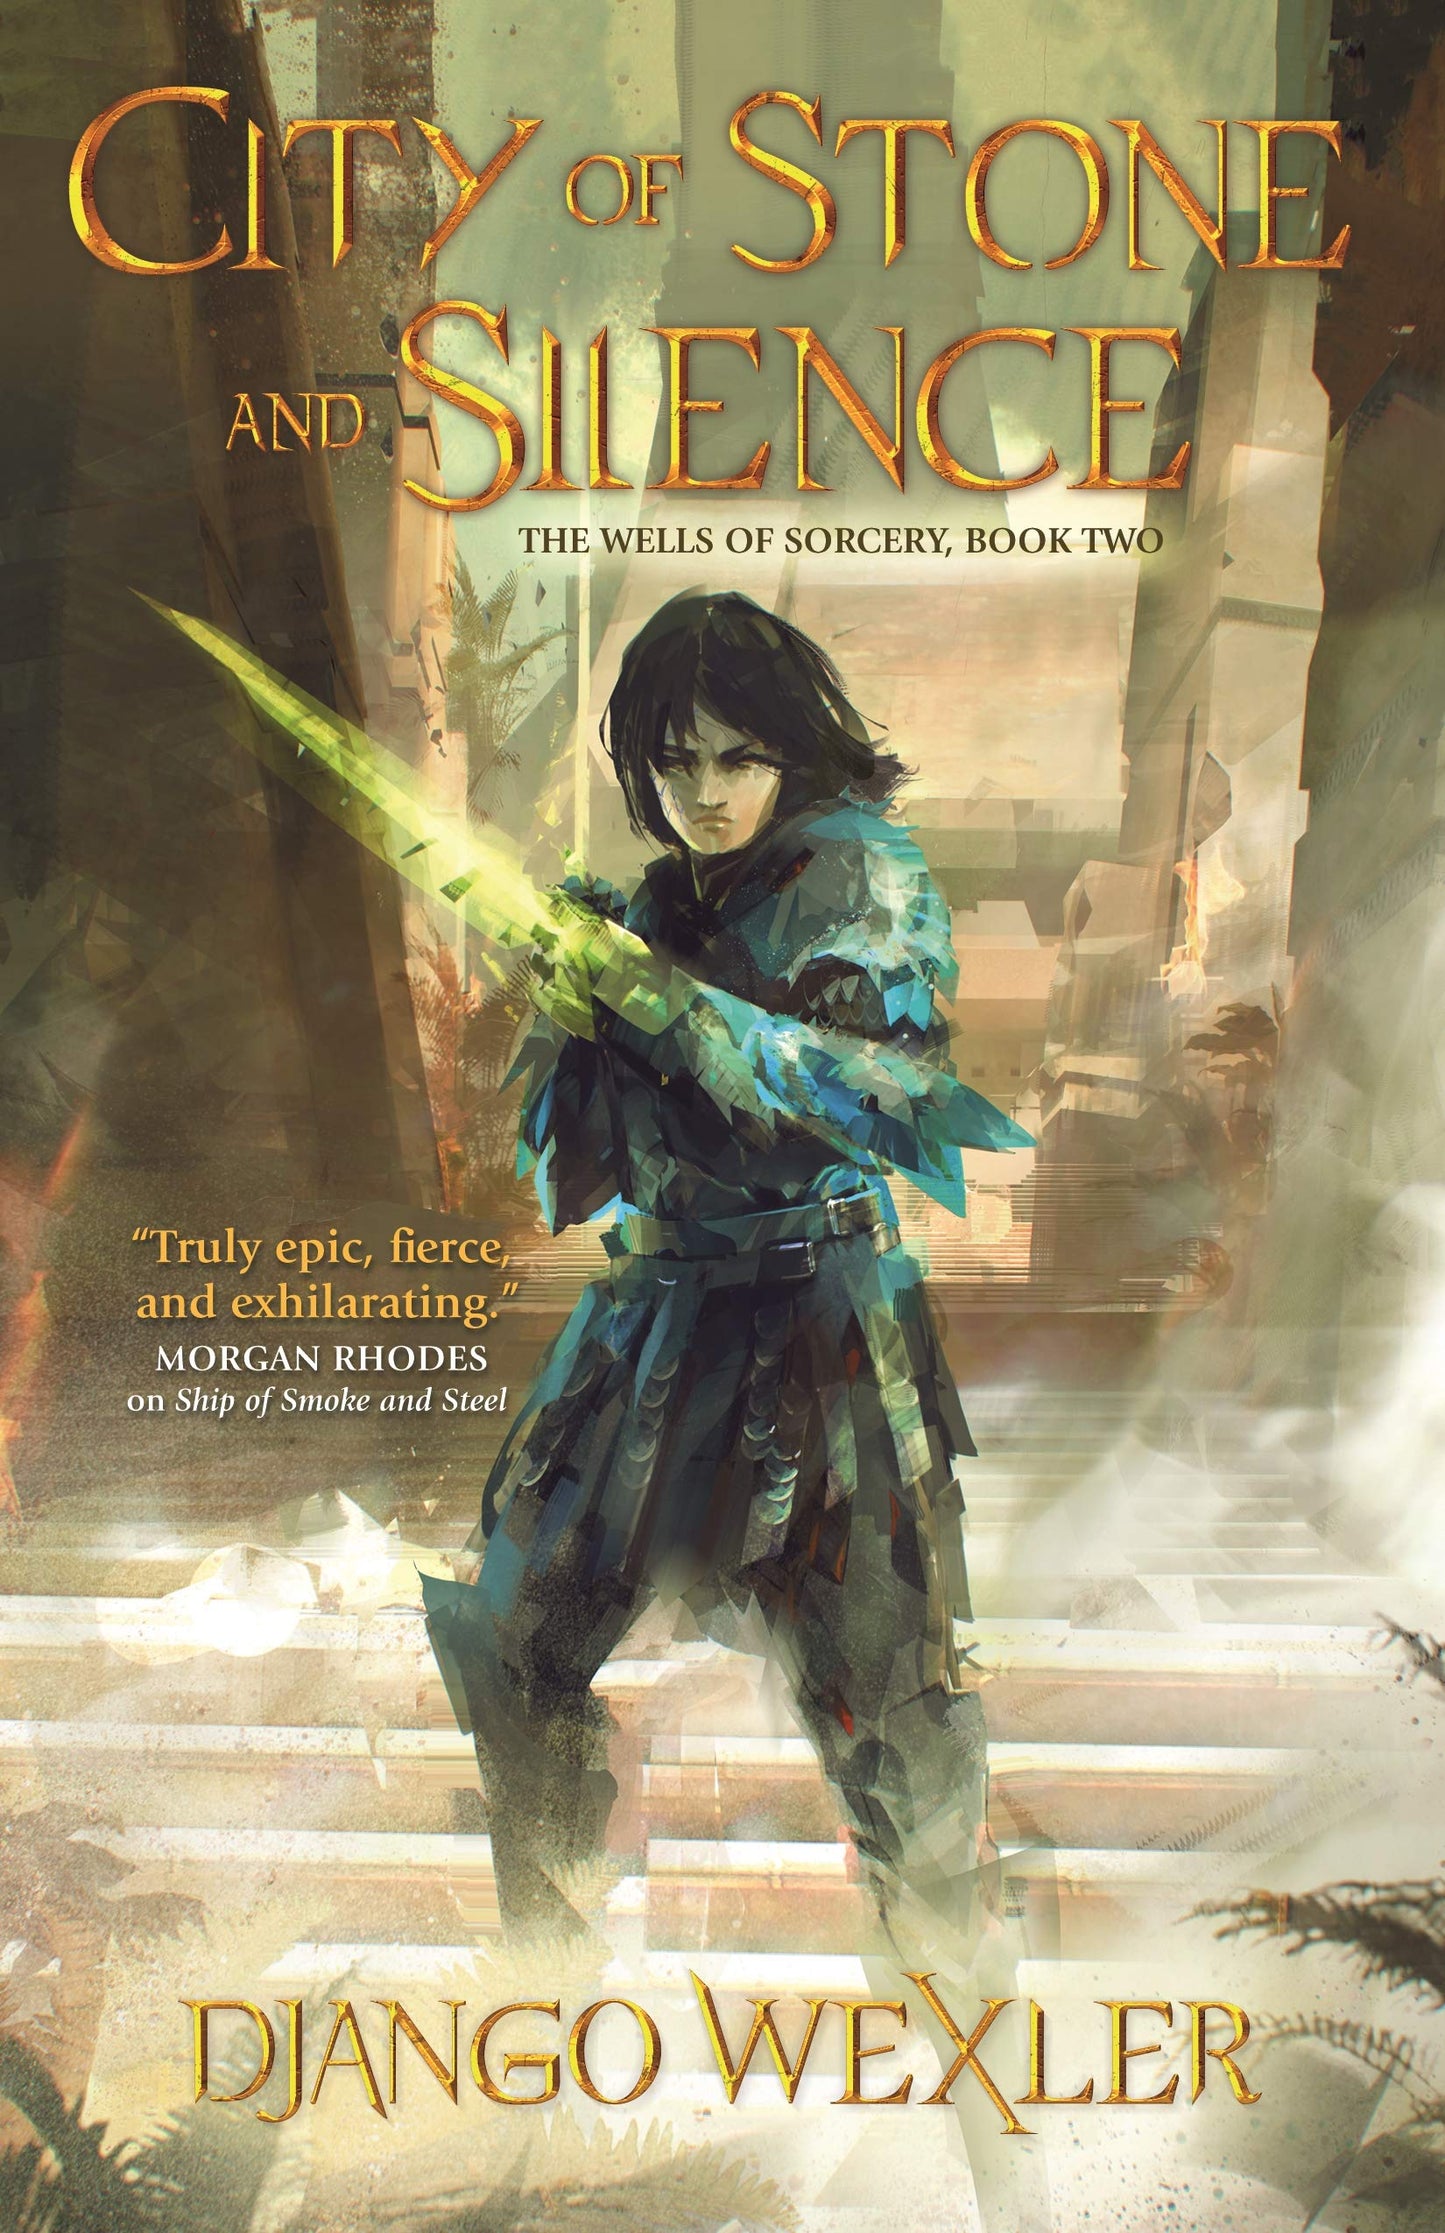 City of Stone and Silence by Django Wexler (Hardcover)